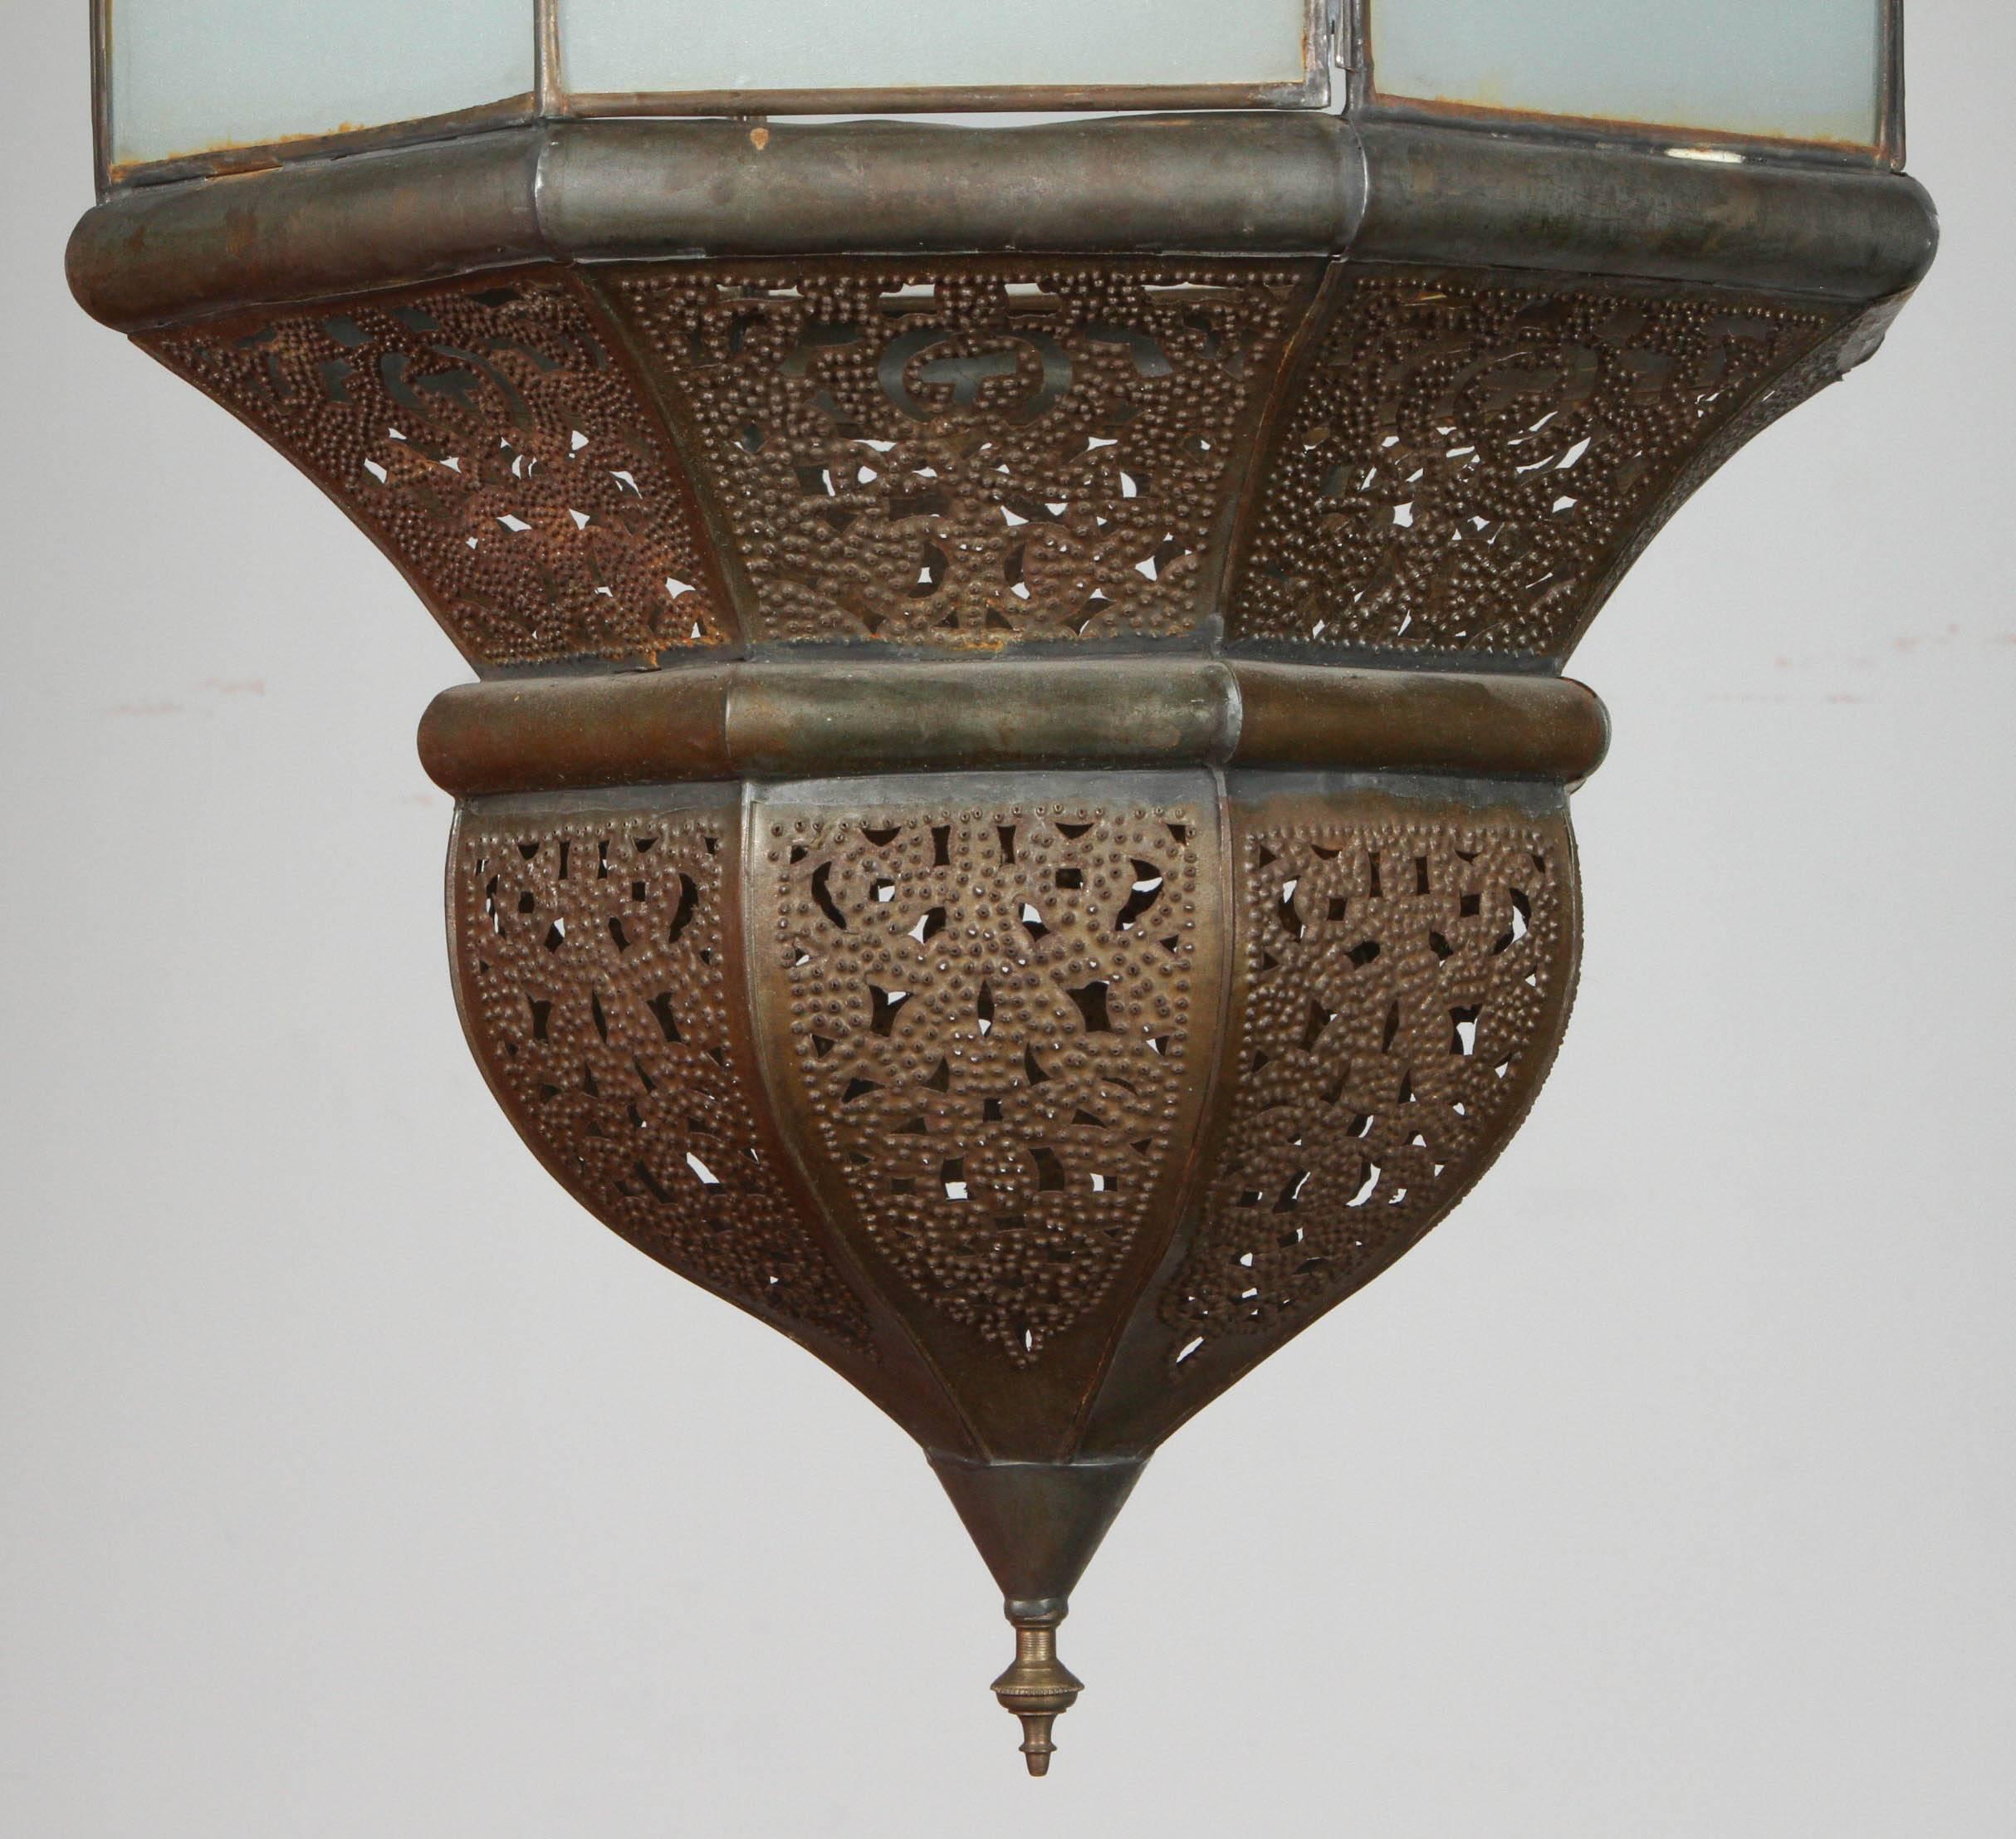 Hand-Crafted Moroccan Moorish Hanging Lantern with Milky Glass